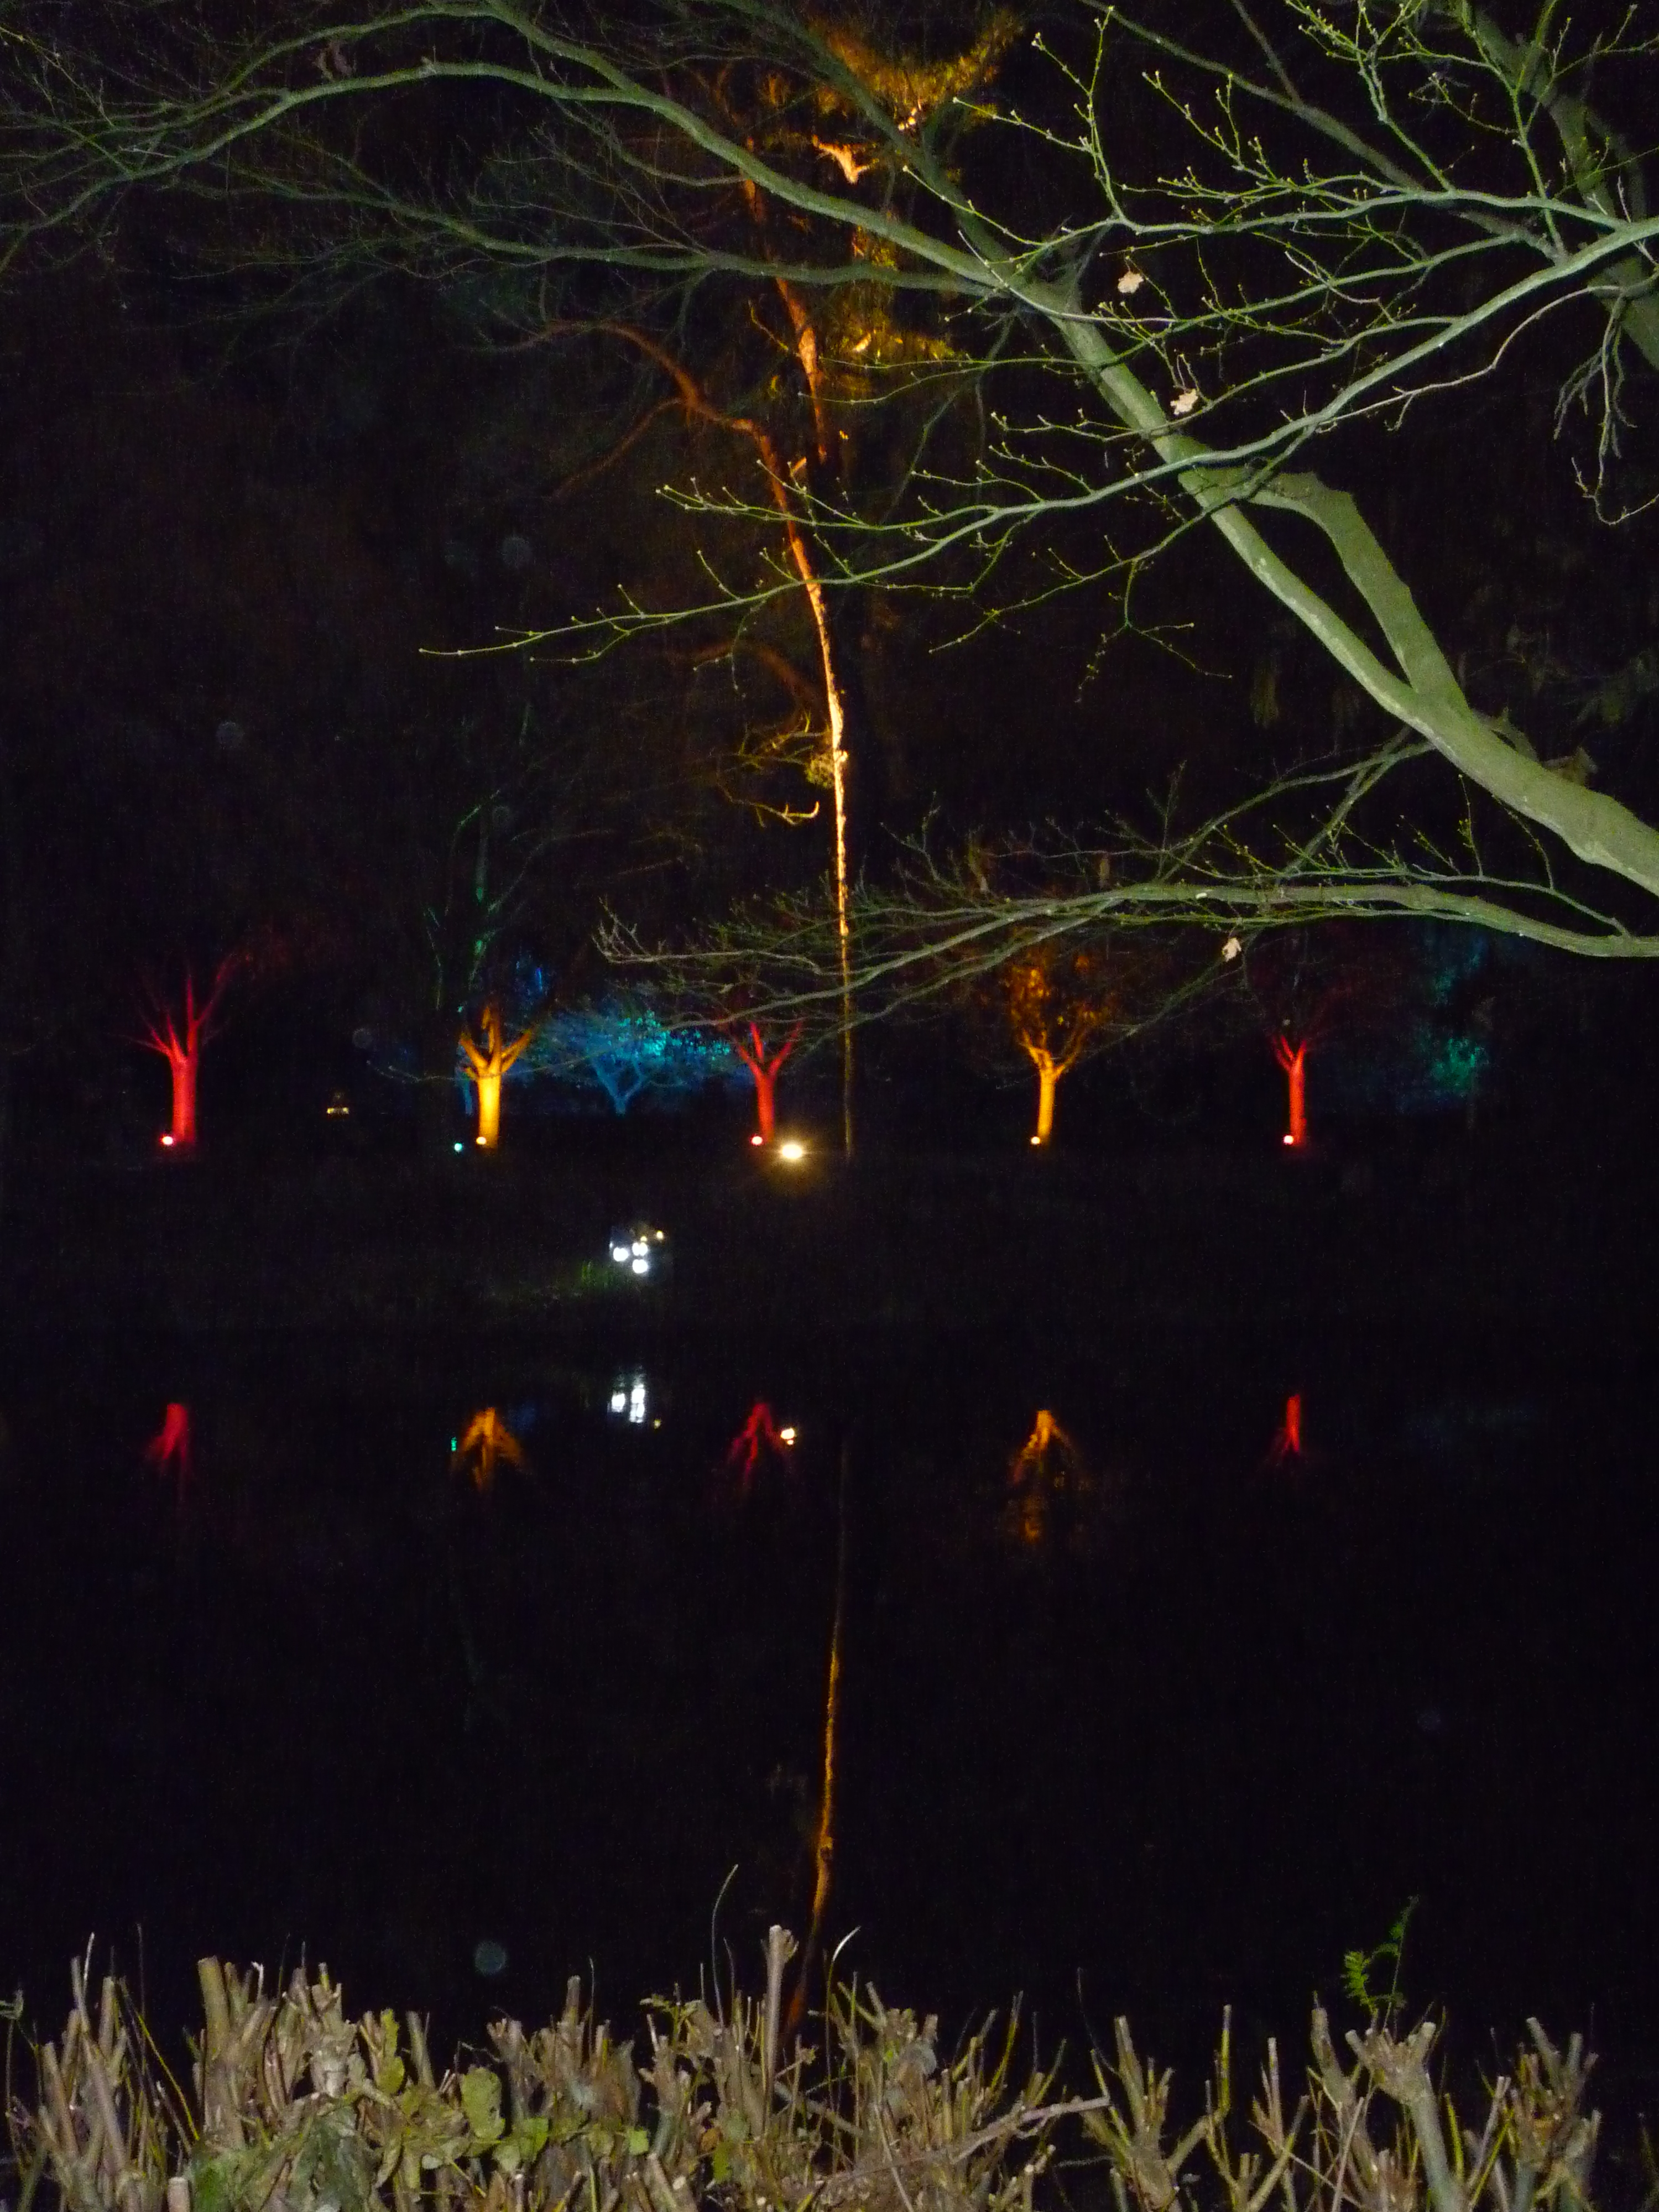 A Walk through an Enchanted Woodland - trees reflected on water